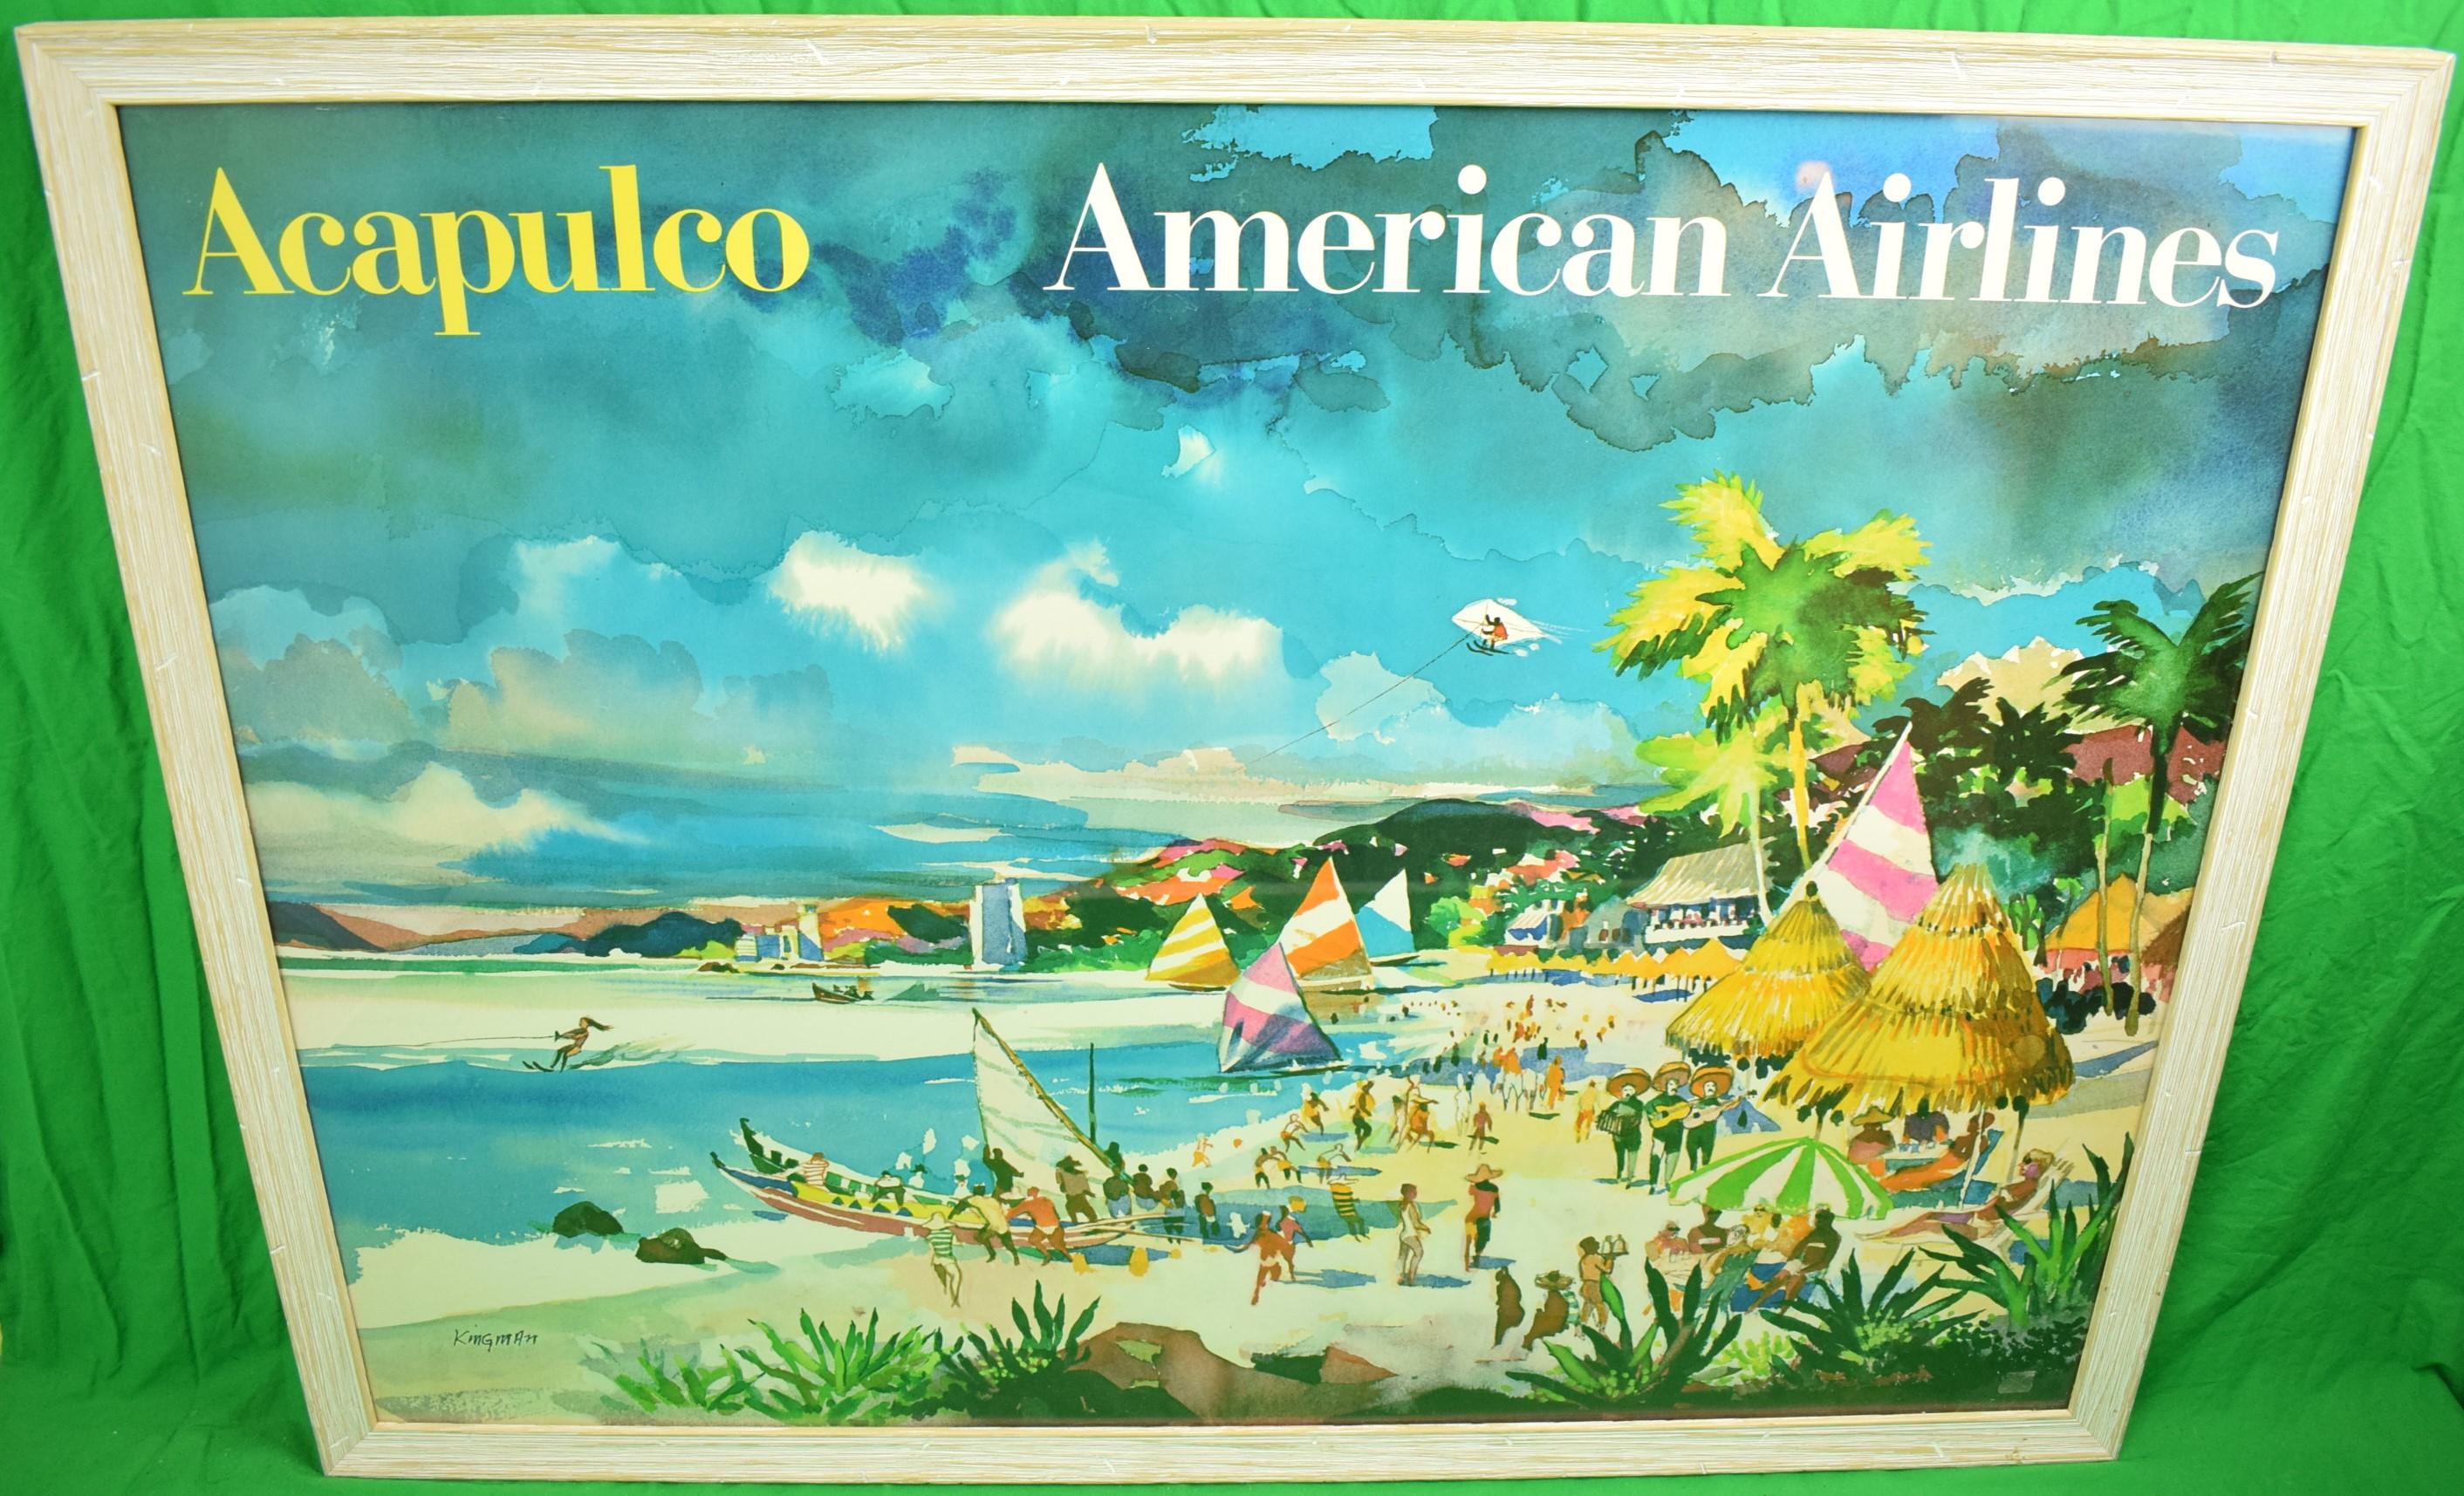 American Airlines Acapulco - Mixed Media Art by Dong Kingman